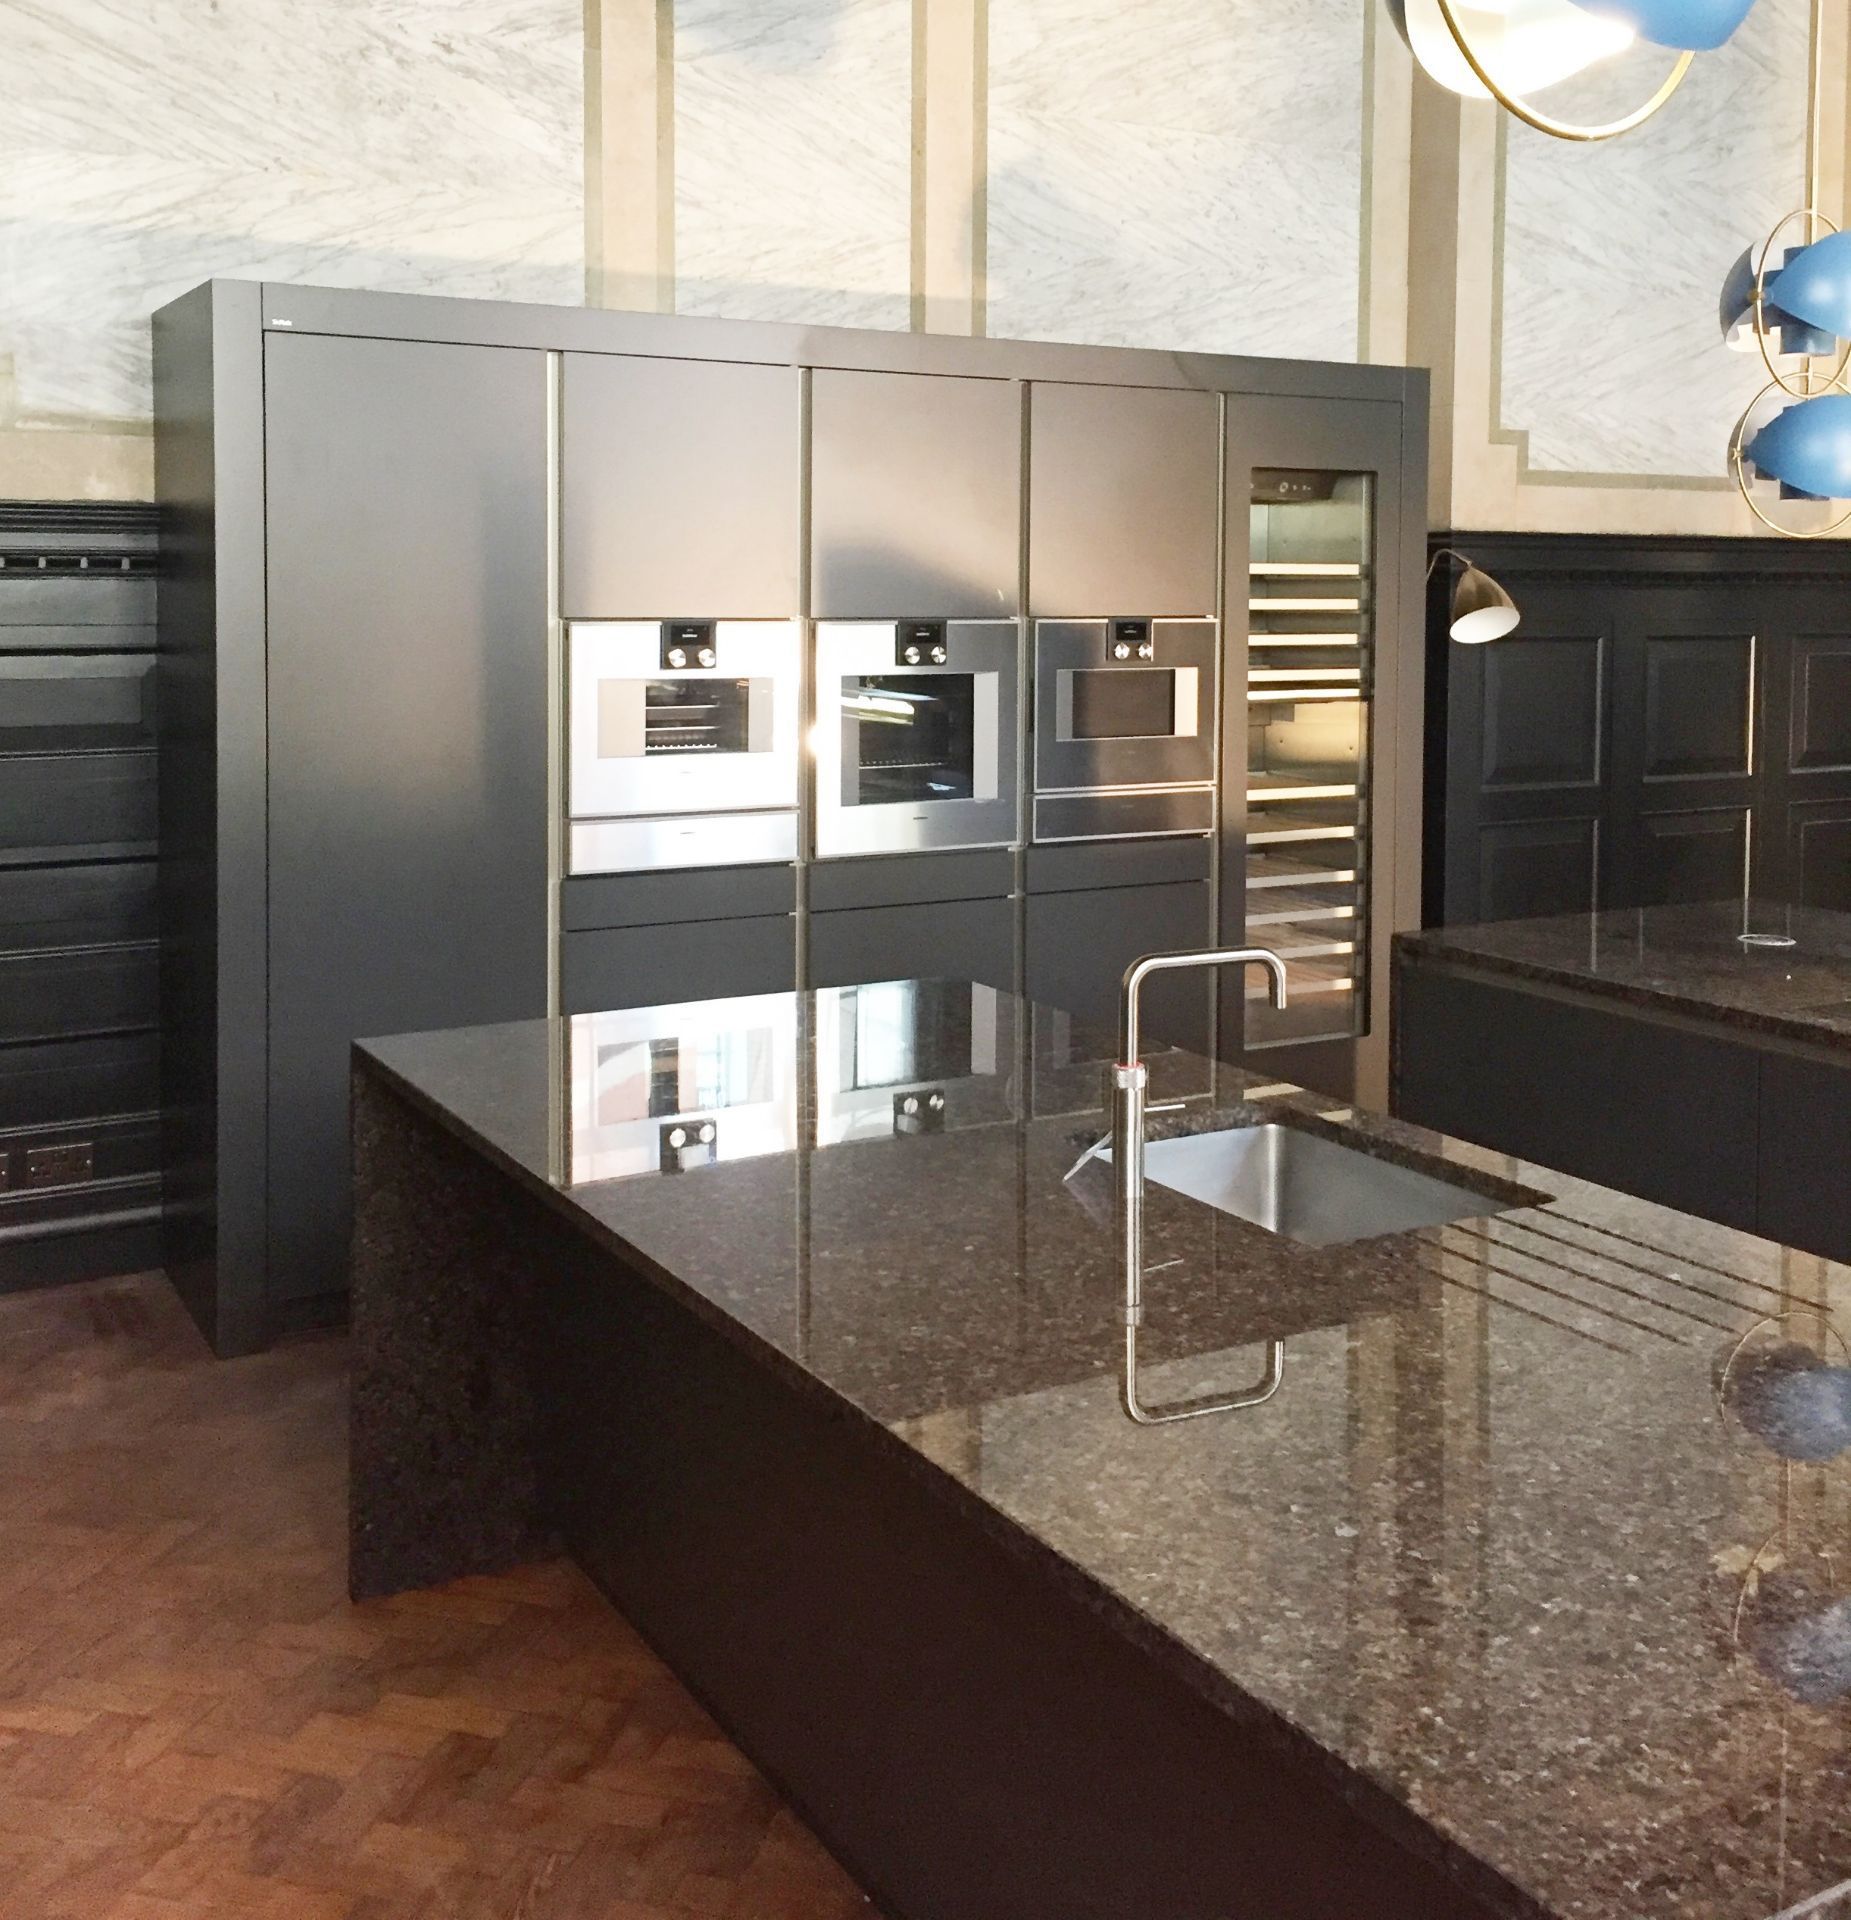 1 x SieMatic Fitted Kitchen in Basalt Grey Matt With Handleless Doors - Features Gaggenau - Image 5 of 10